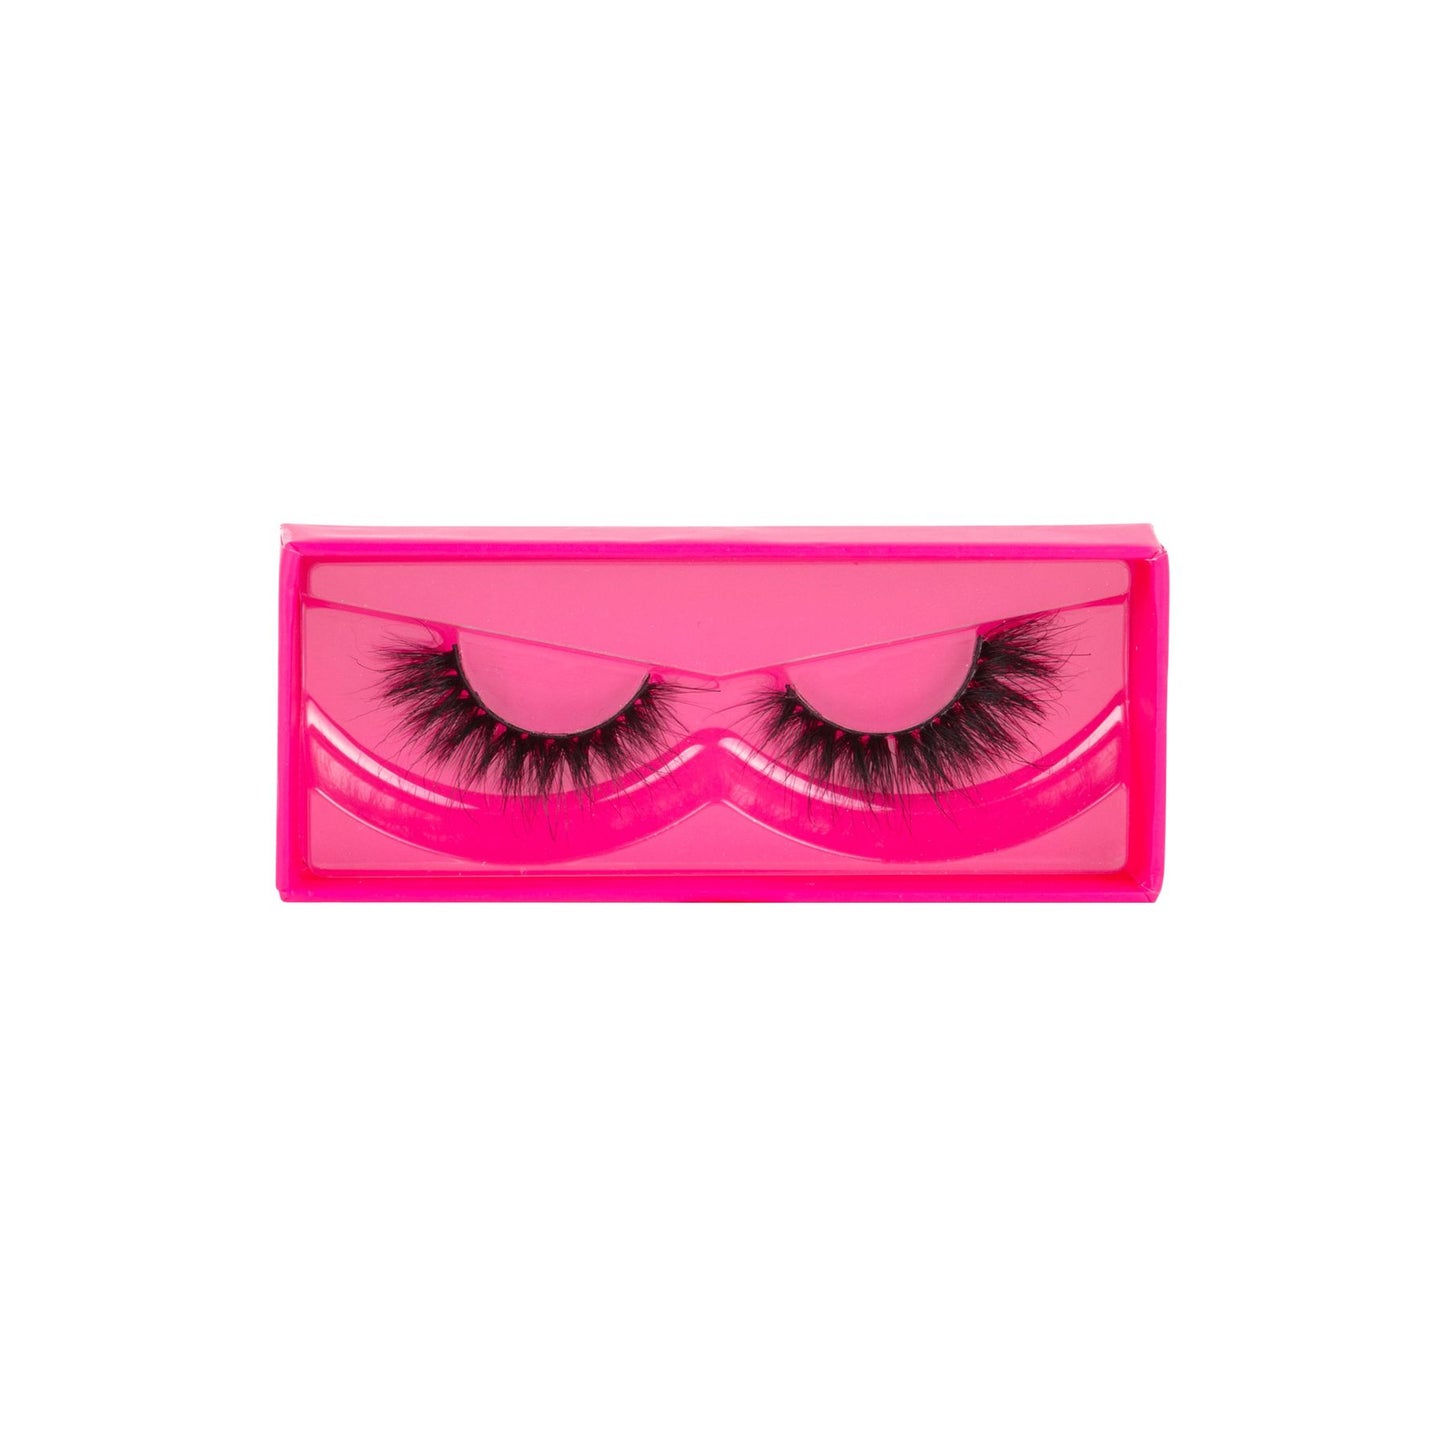 Cryptic - 3D Faux Mink Lashes